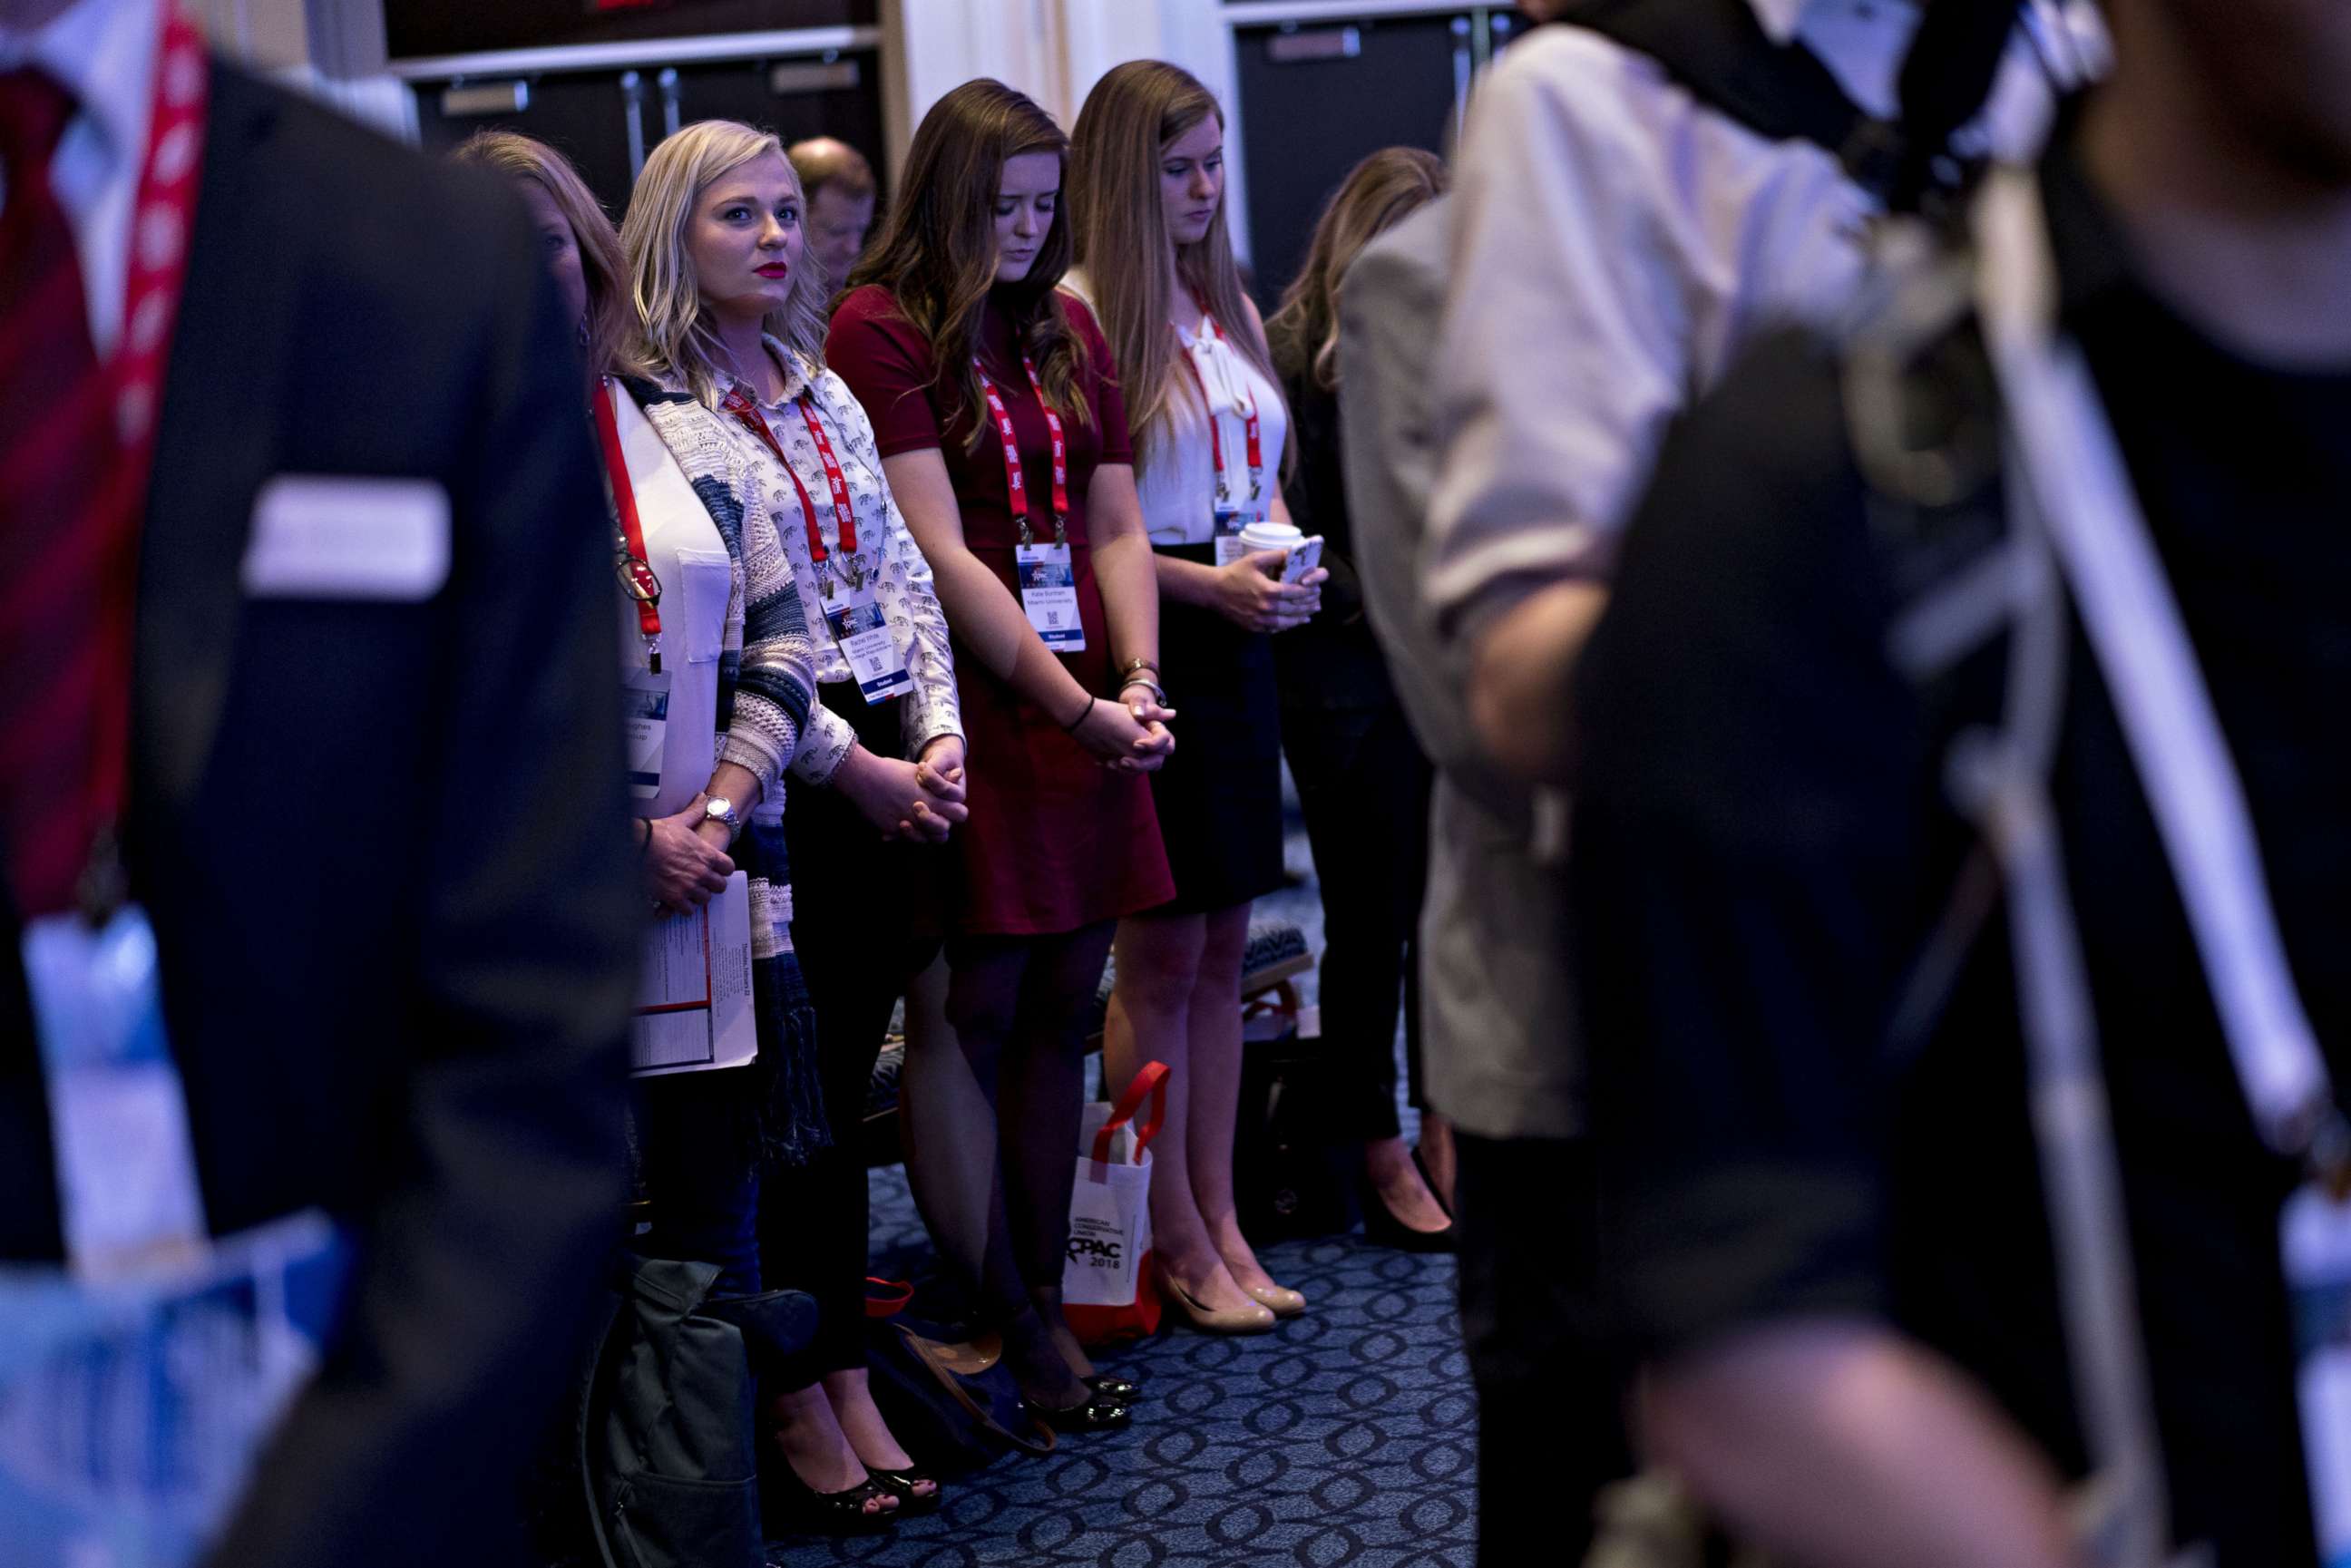 PHOTO: Attendees listen to a prayer at the Conservative Political Action Conference  in National Harbor, Md., Feb. 22, 2018